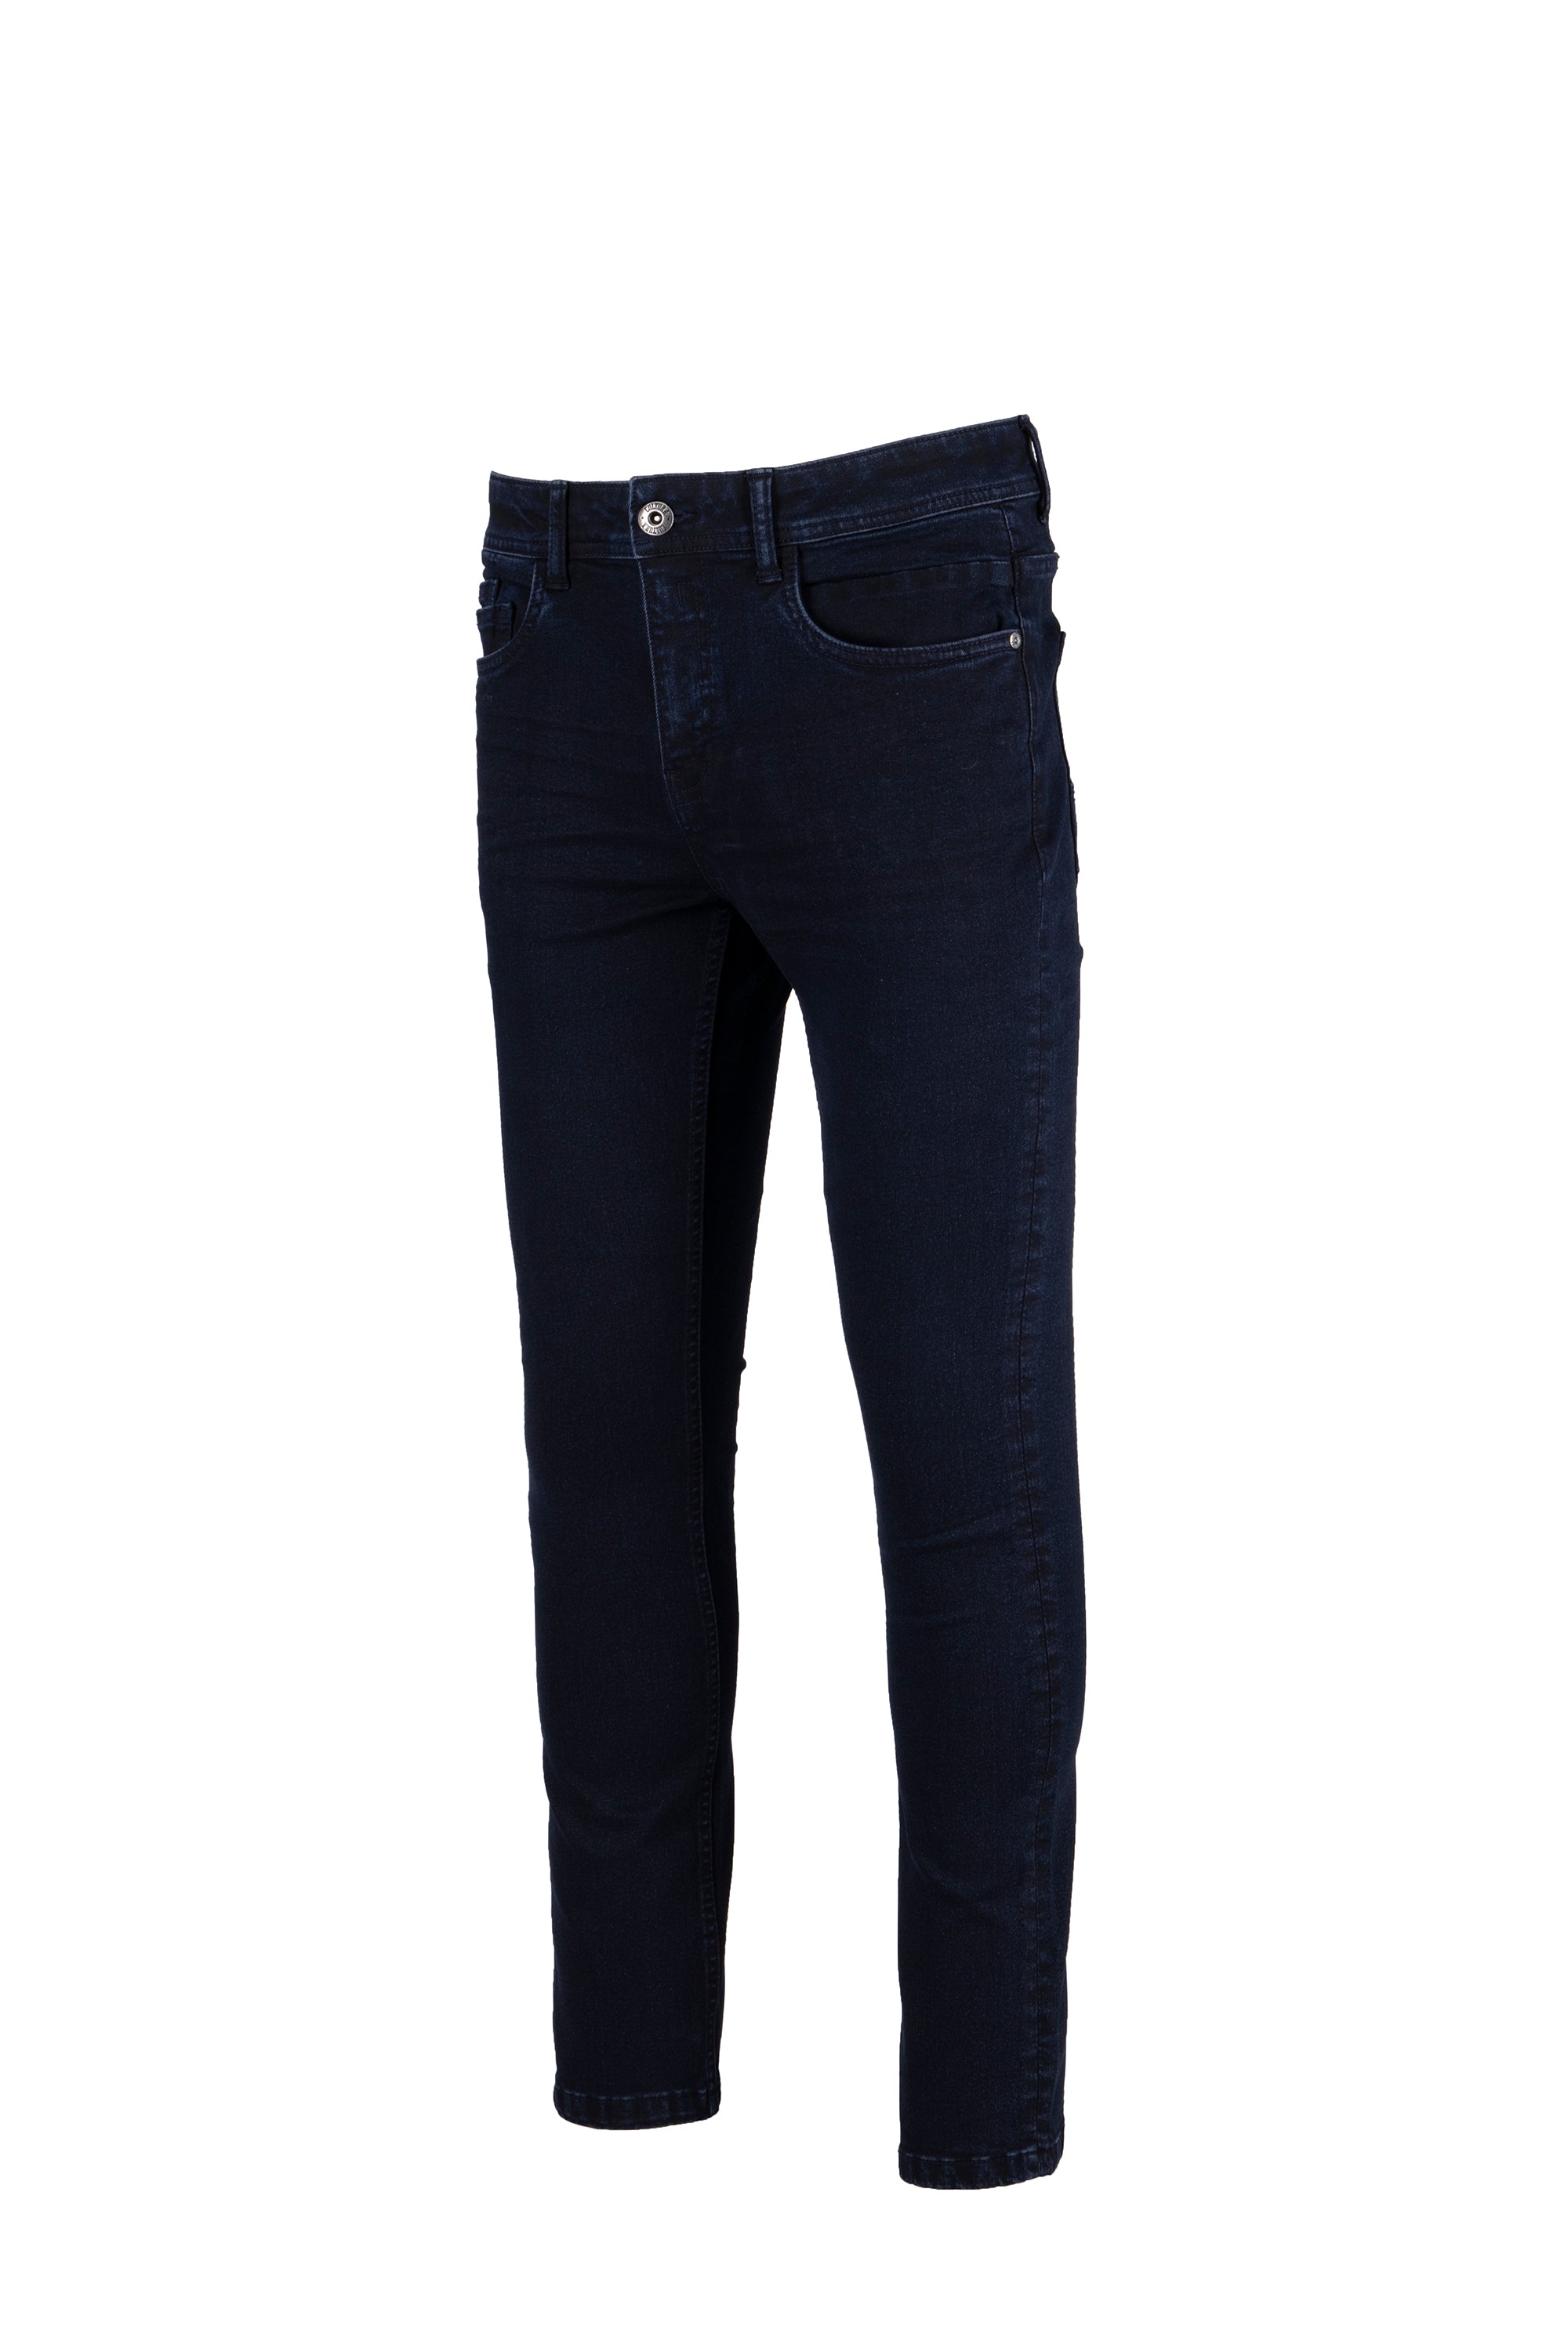 CULTURA AZURE Skinny fit Stretch Jeans for Men – X-RAY JEANS